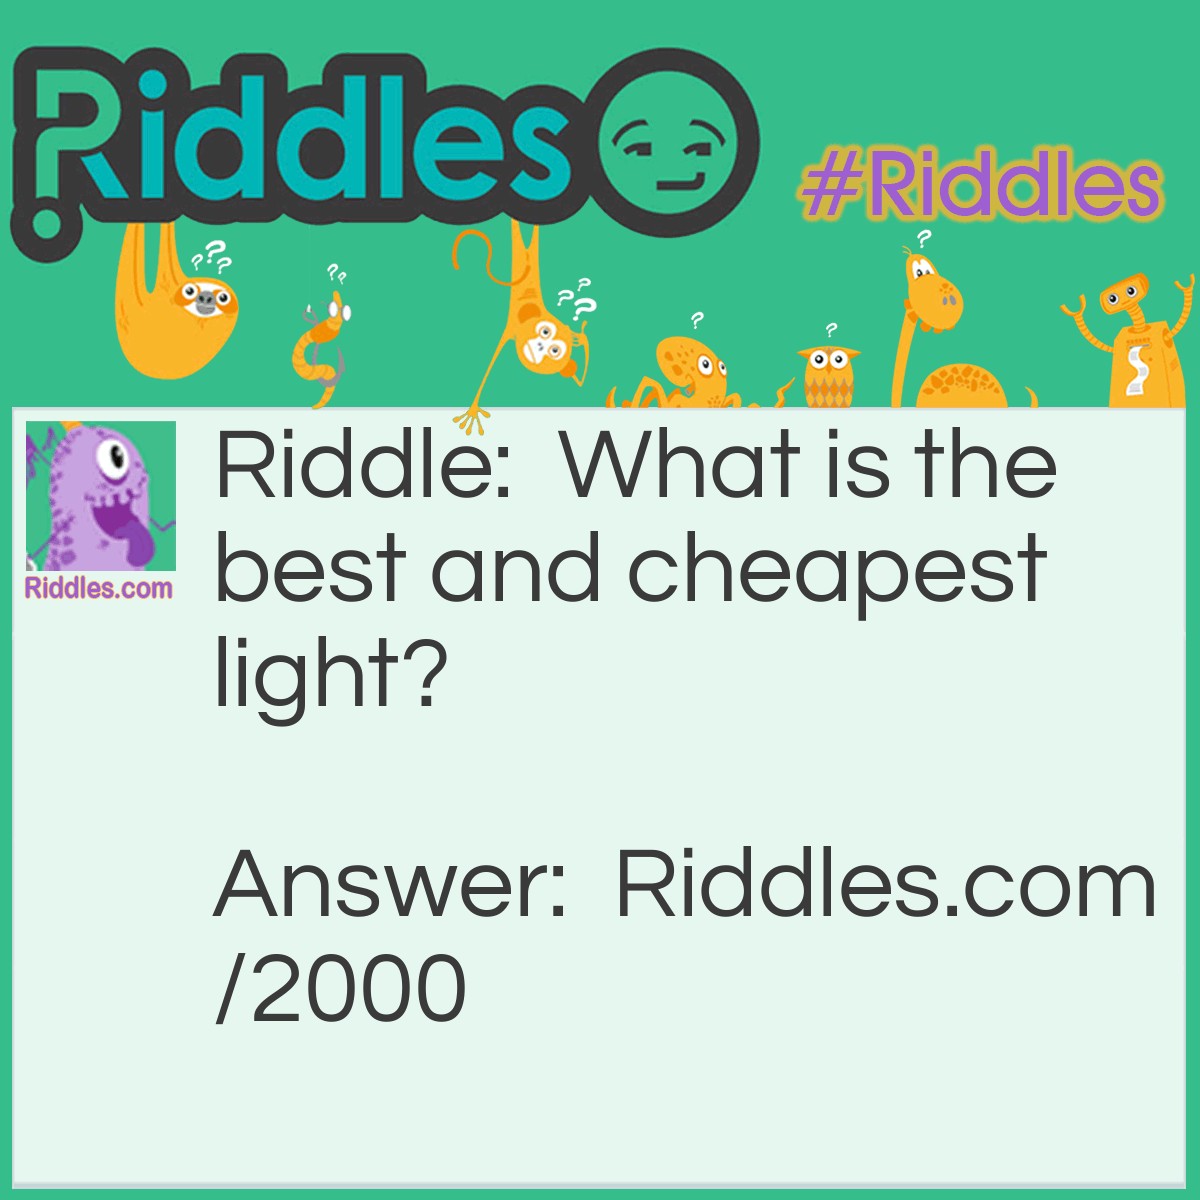 Riddle: What is the best and cheapest light? Answer: Daylight.